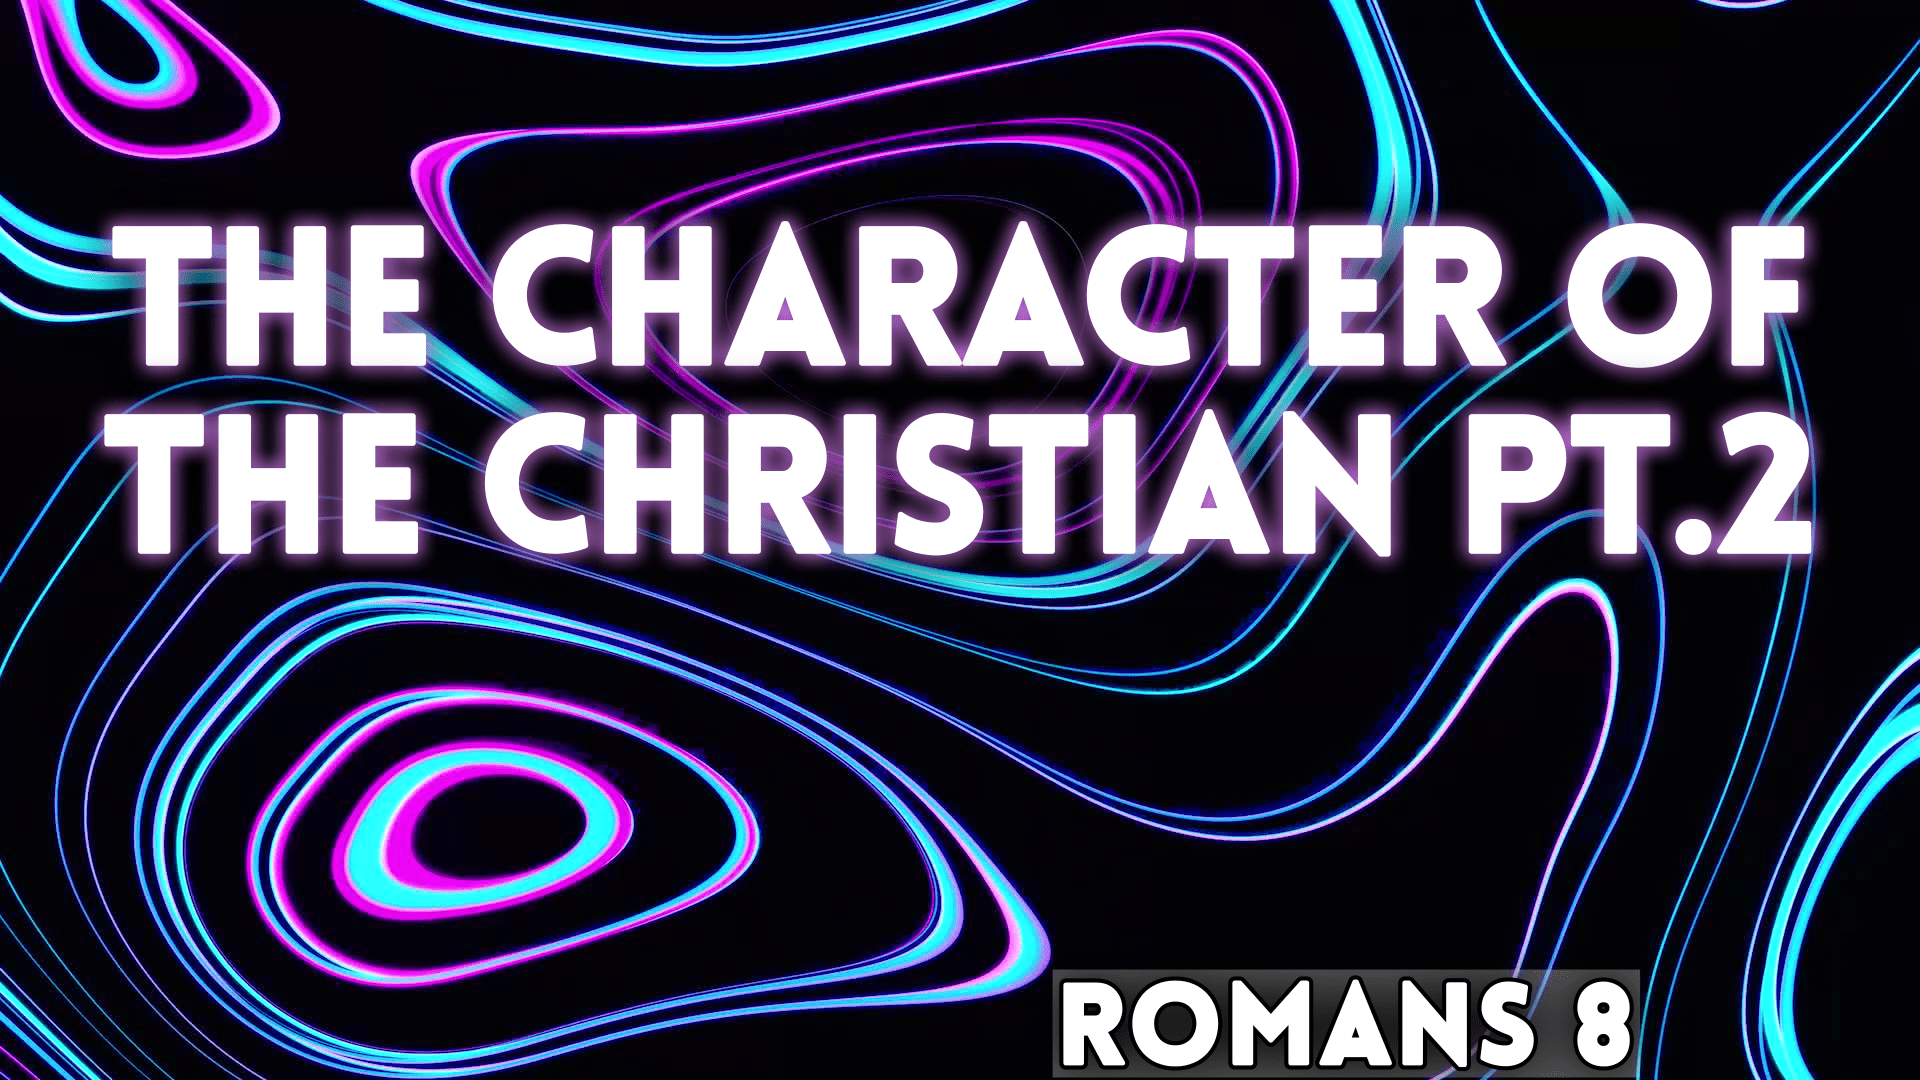 The Character Of The Christian Pt.3